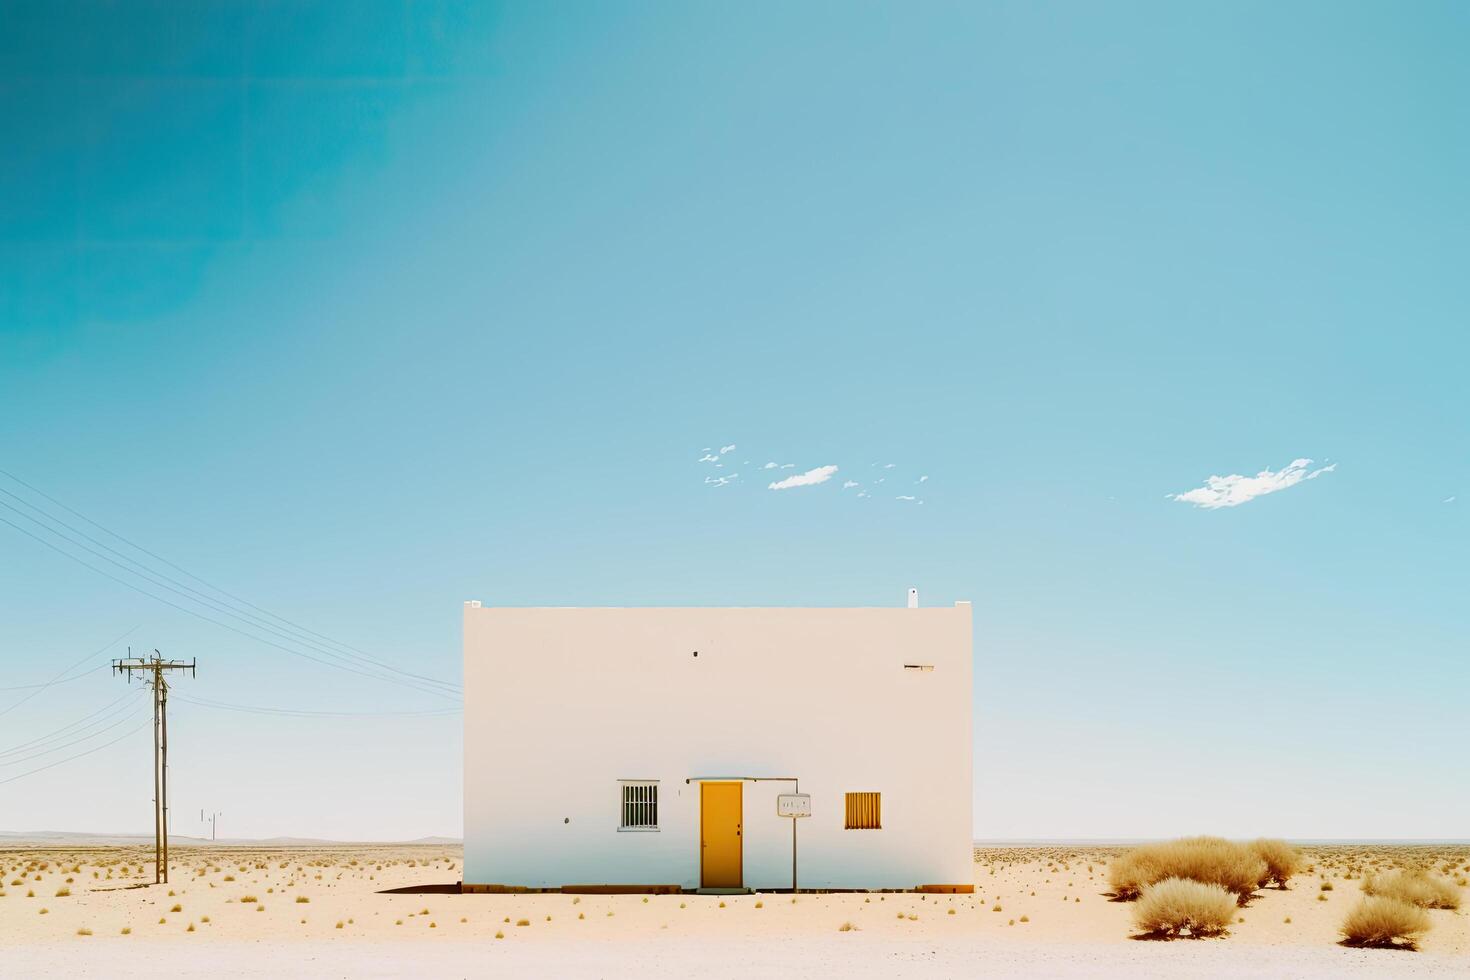 Lonely house in the desert with a tree. Illustration photo